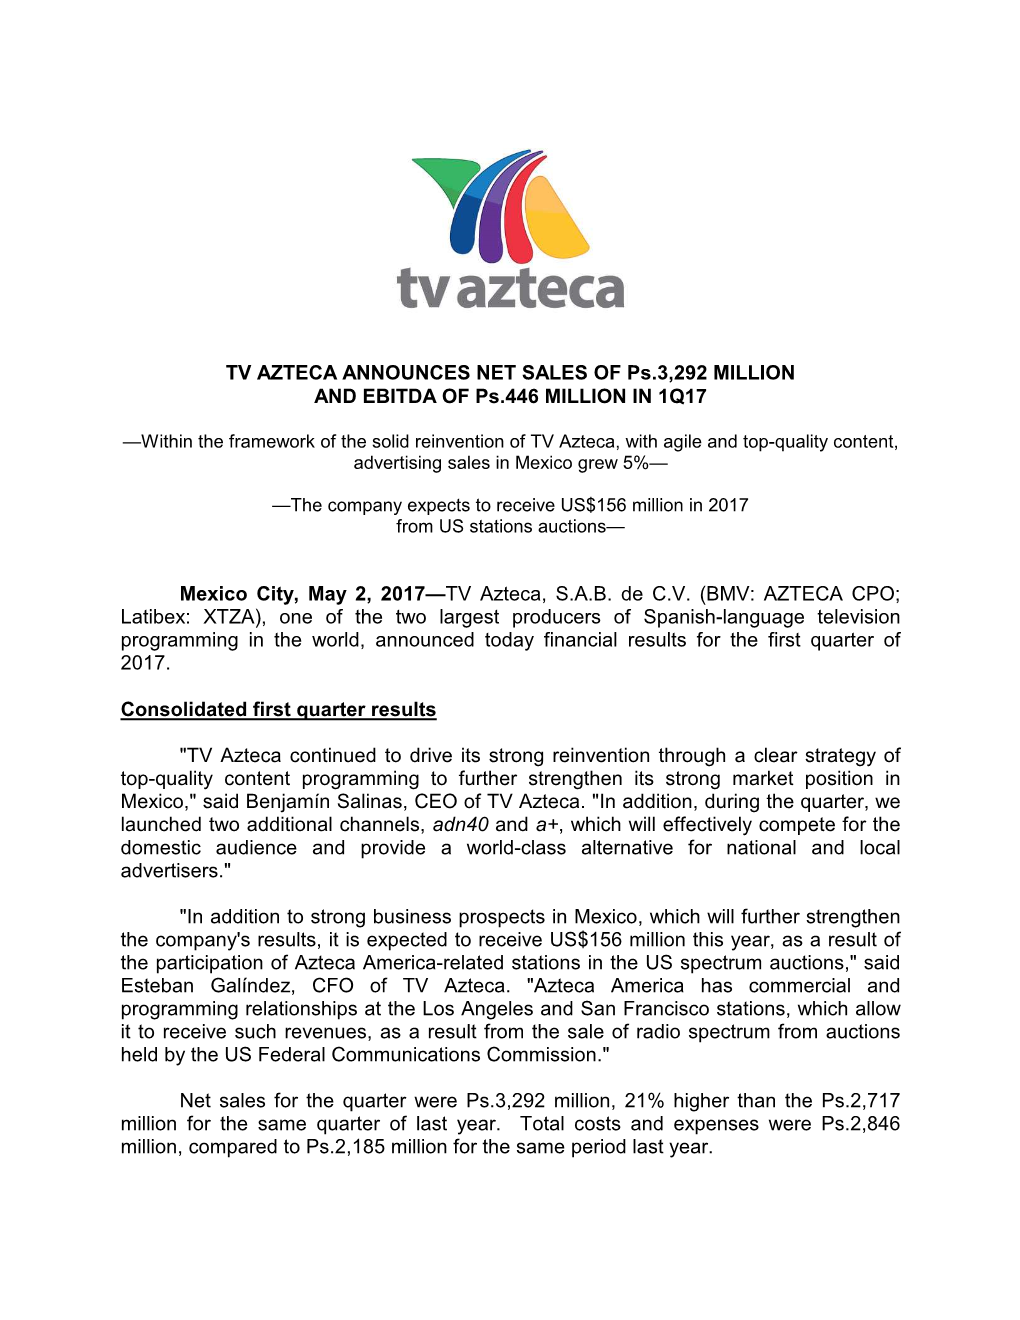 TV AZTECA ANNOUNCES NET SALES of Ps.3,292 MILLION and EBITDA of Ps.446 MILLION in 1Q17